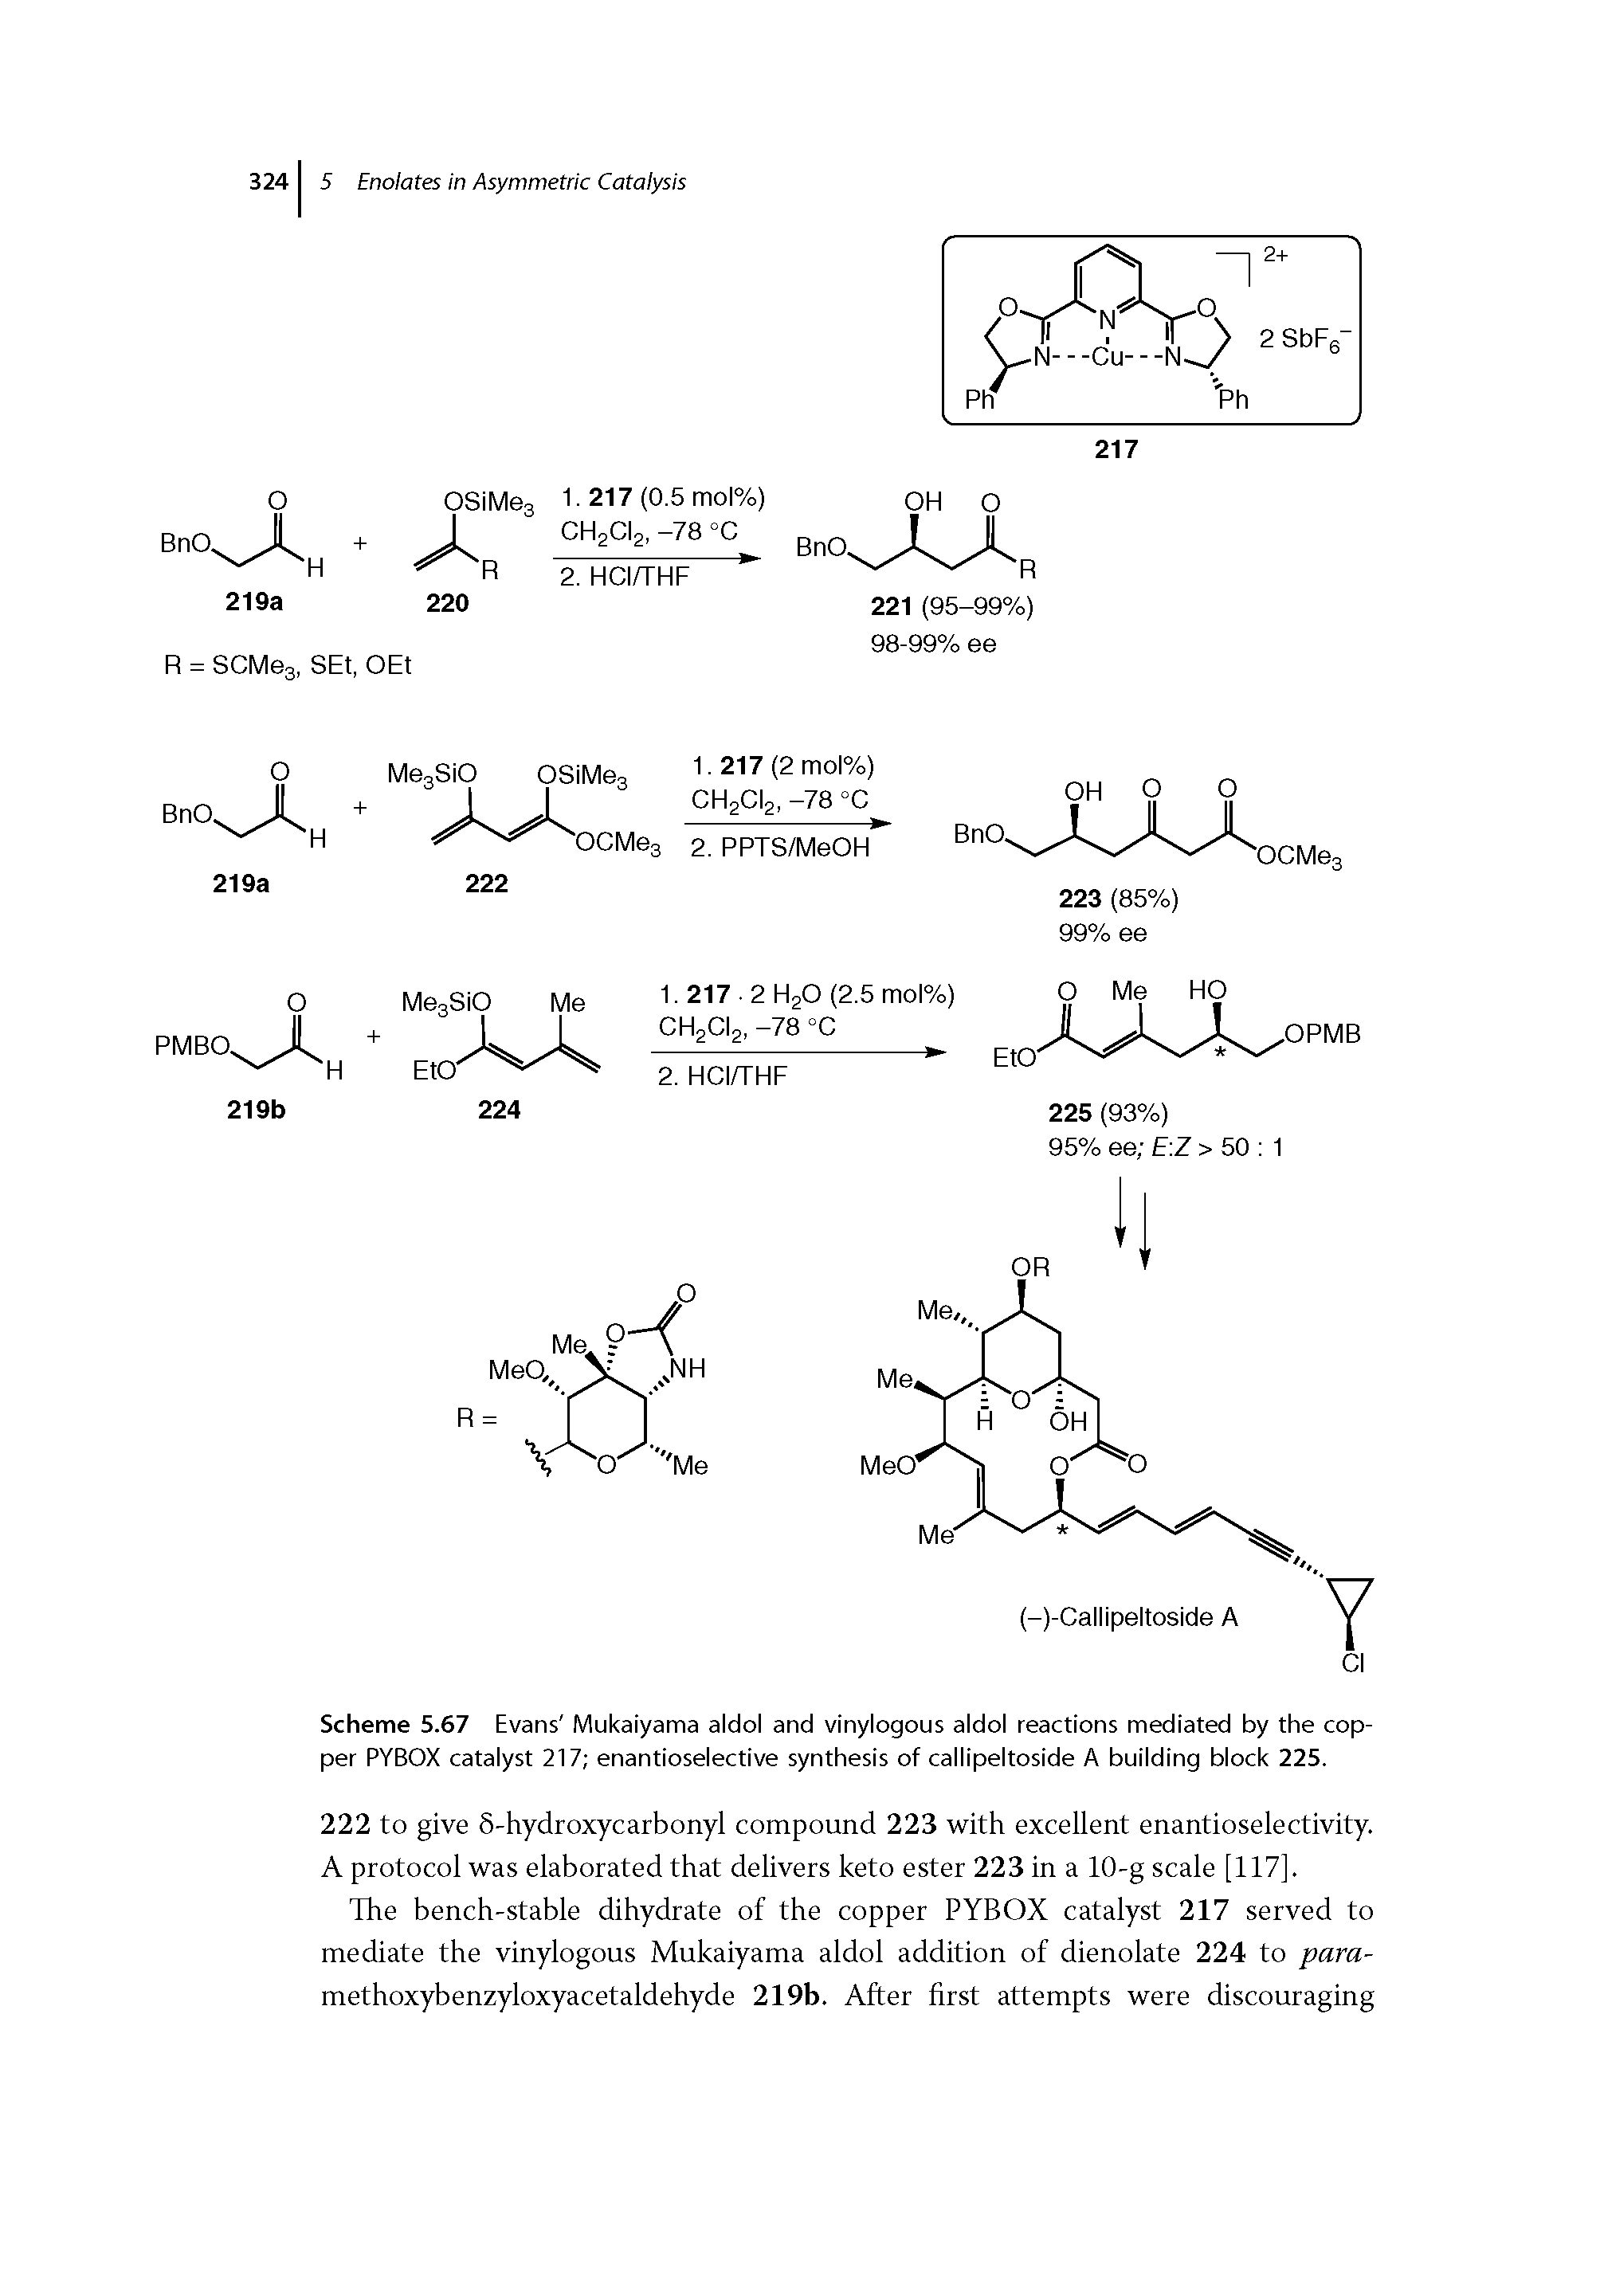 Scheme 5.67 Evans Mukaiyama aldol and vinylogous aldol reactions mediated by the copper PYBOX catalyst 217 enantioselective synthesis of callipeltoside A building block 225.